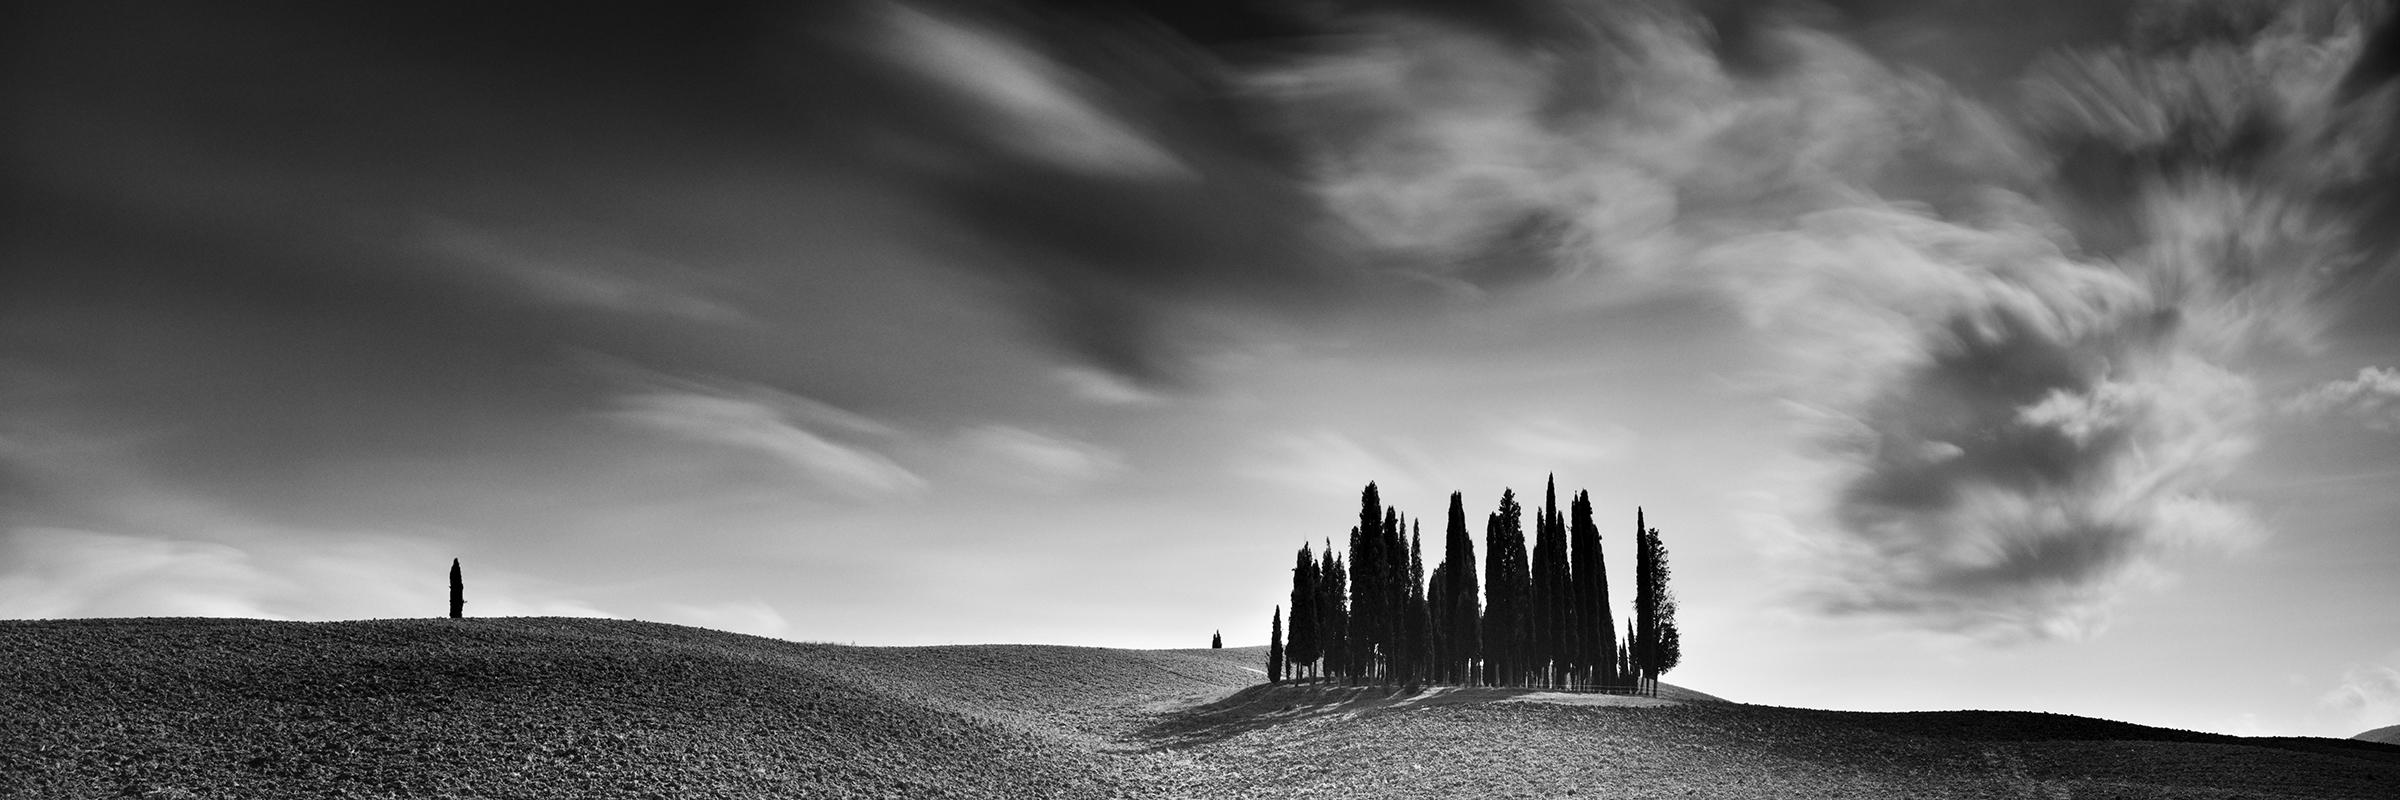 Cypress Hill Panorama, Tuscany, black and white photography, fine art landscape